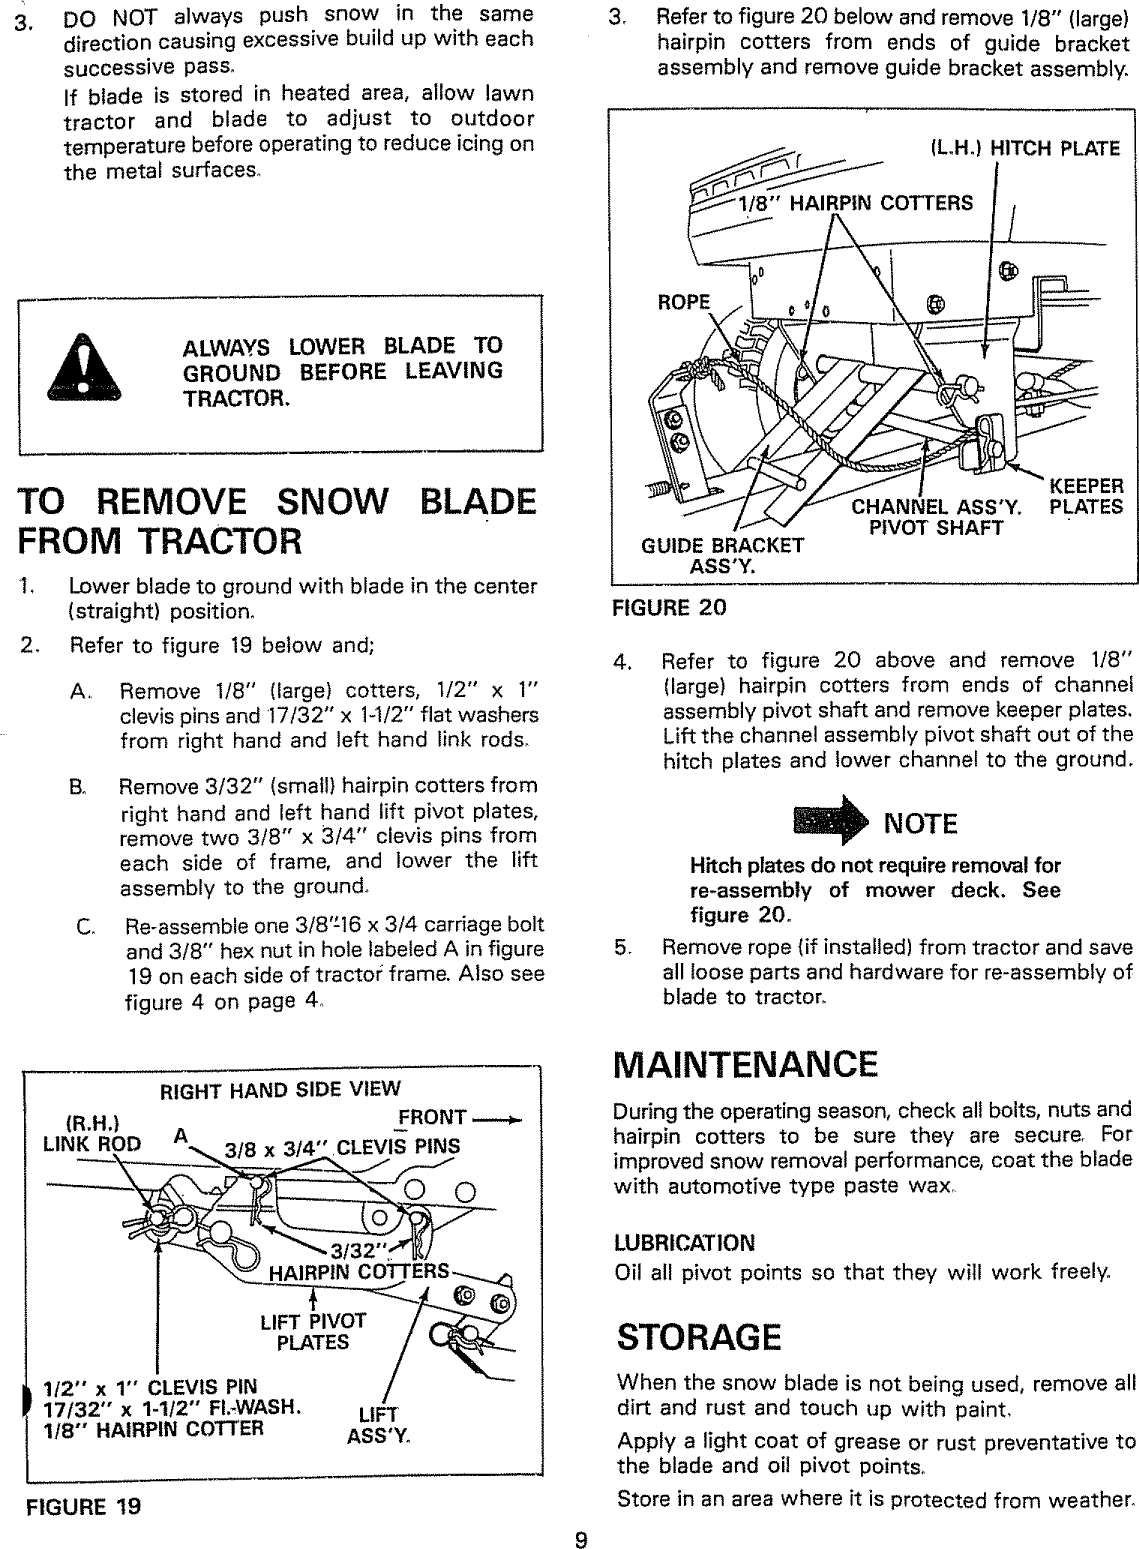 Page 9 of 11 - Craftsman 486244071 User Manual  42 SNOW BLADE - Manuals And Guides L0909235